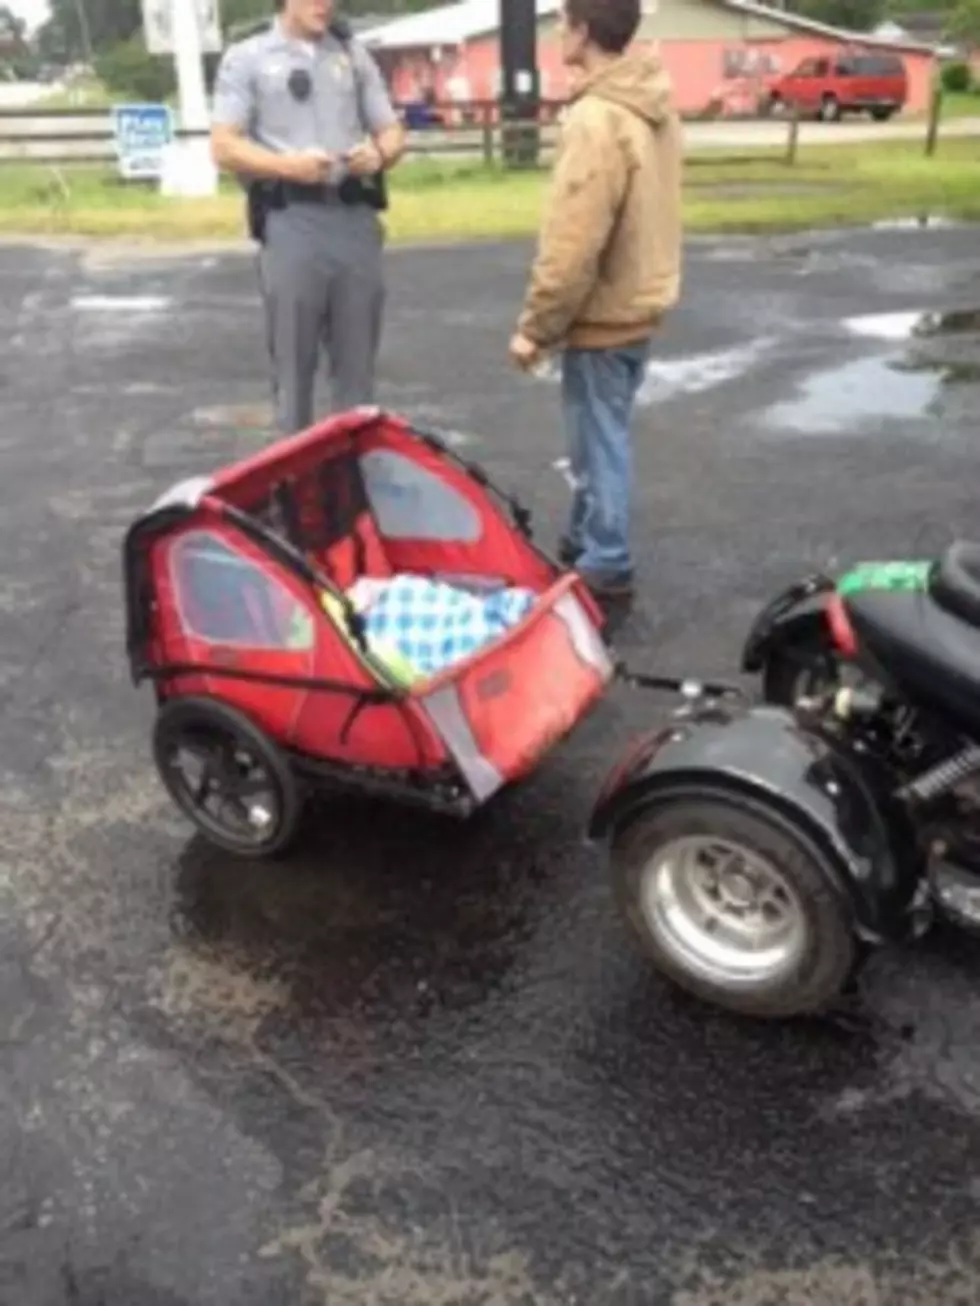 Couple Arrested For Towing Baby Behind Moped